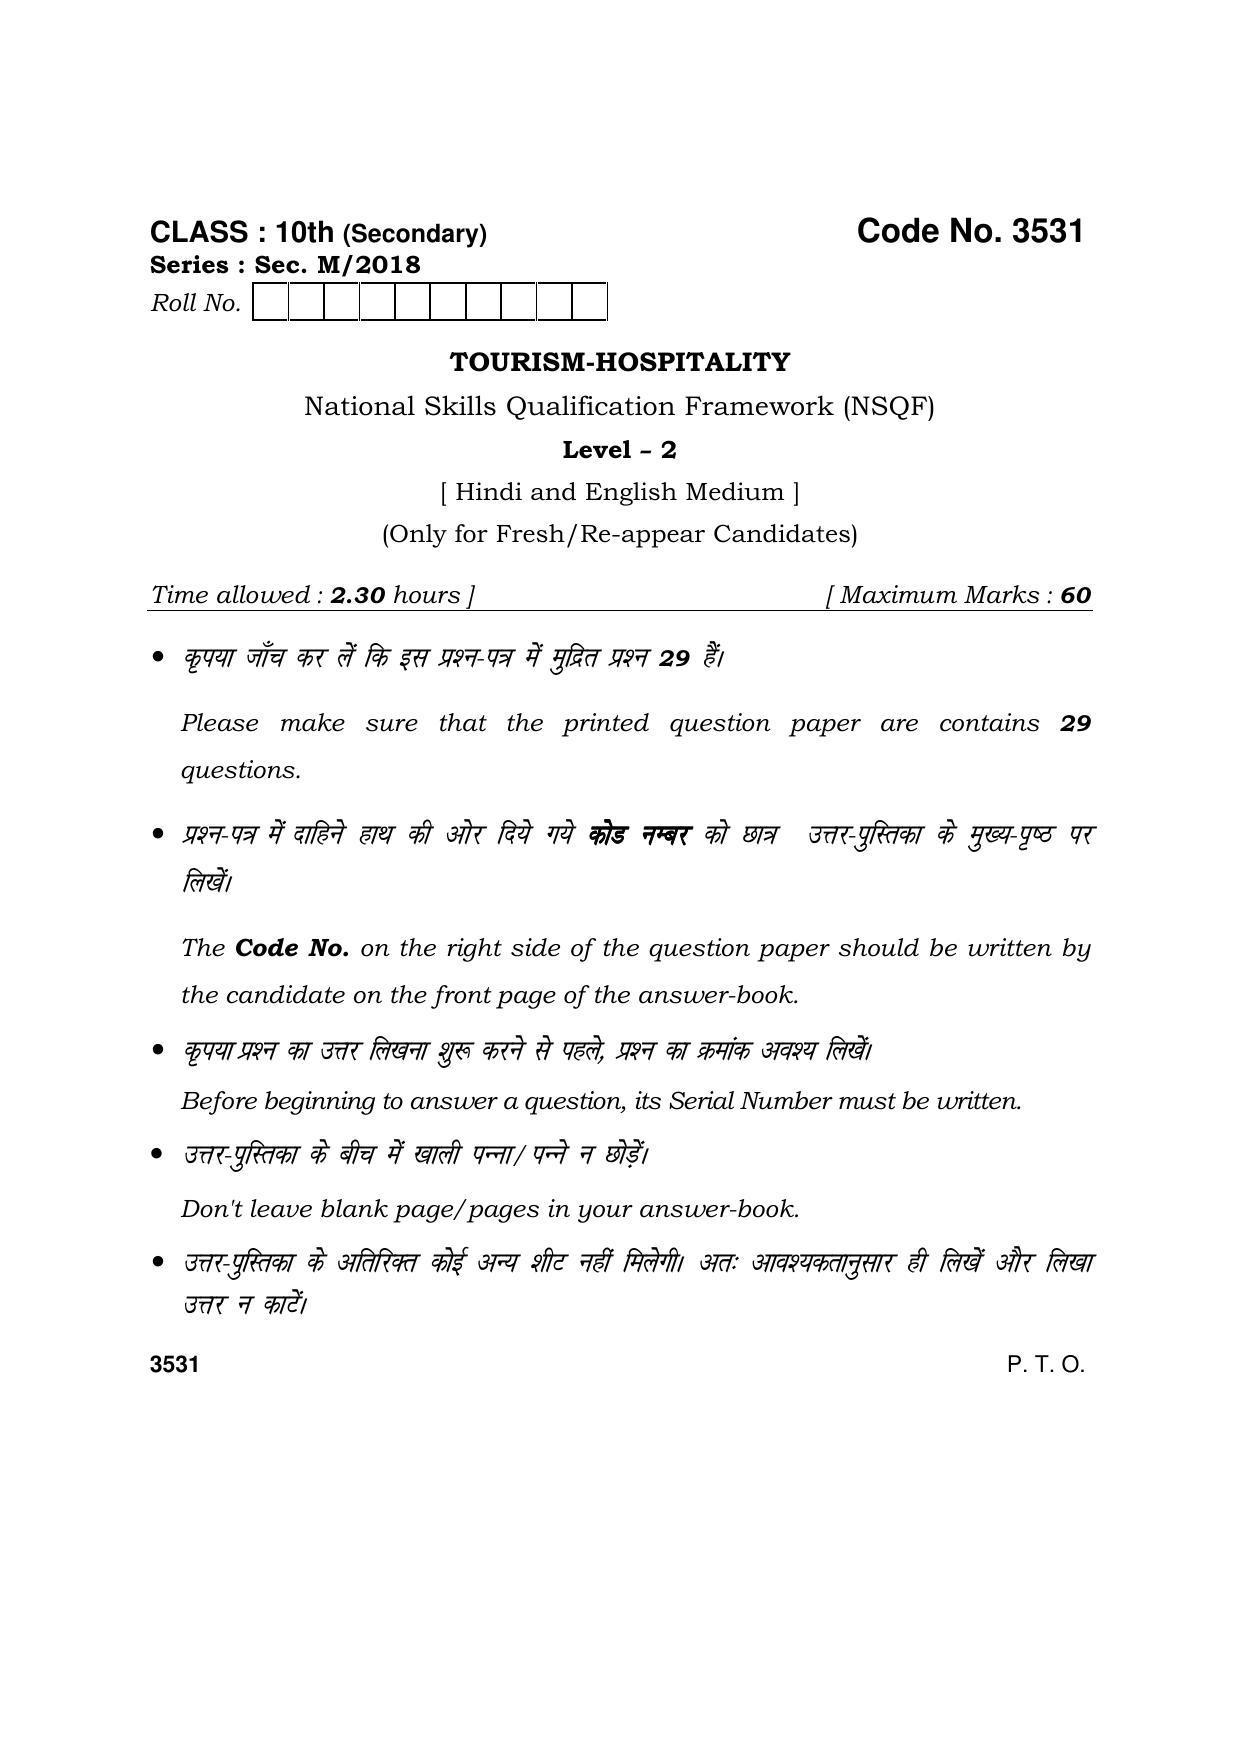 Haryana Board HBSE Class 10 Tourism -Hospitality 2018 Question Paper - Page 1